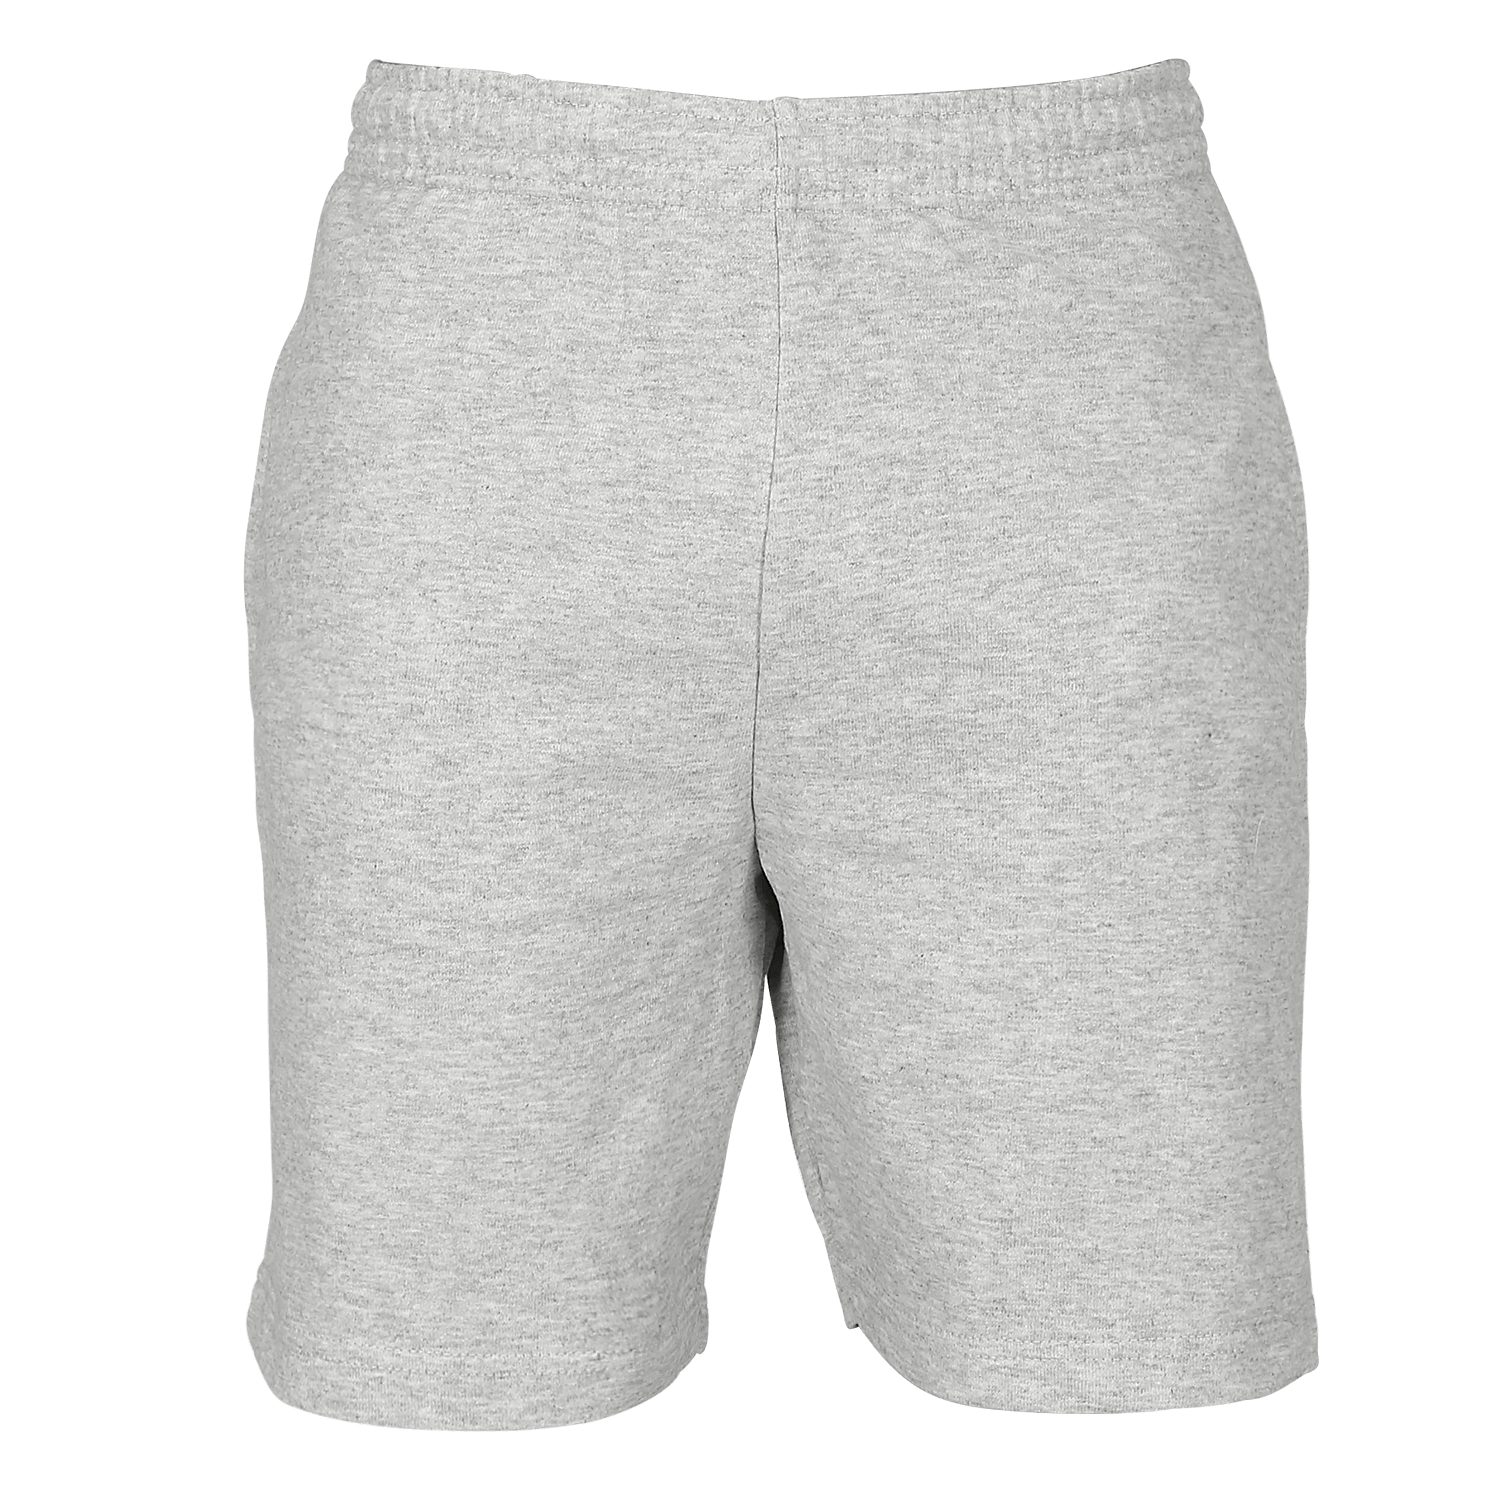 Fruit of the Loom Homewearhose graumeliert the Loom Lightweight of Fruit Shorts